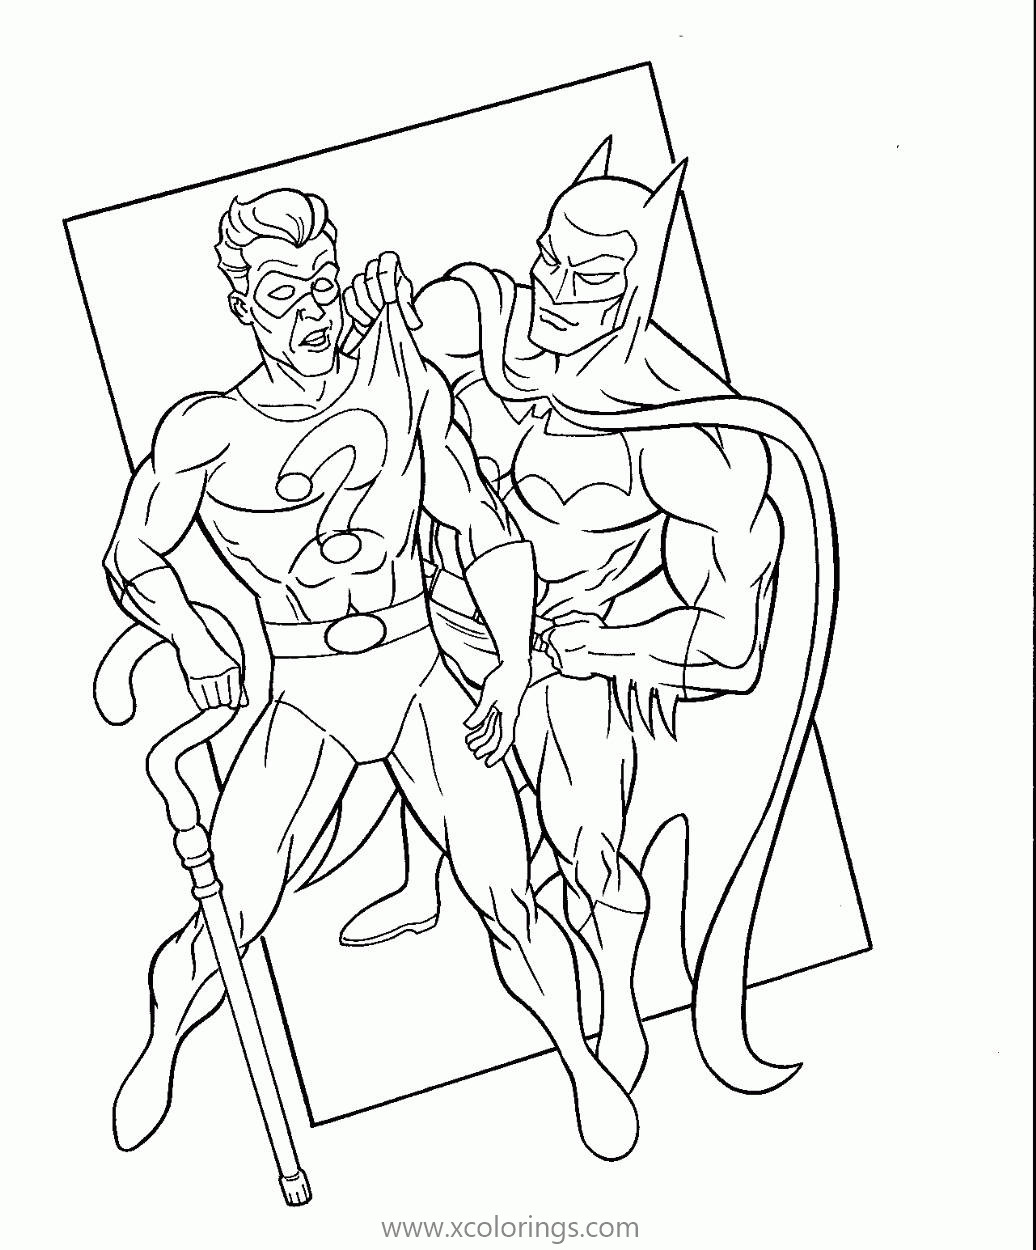 Free DC Comics The Riddler Batman Coloring Pages printable